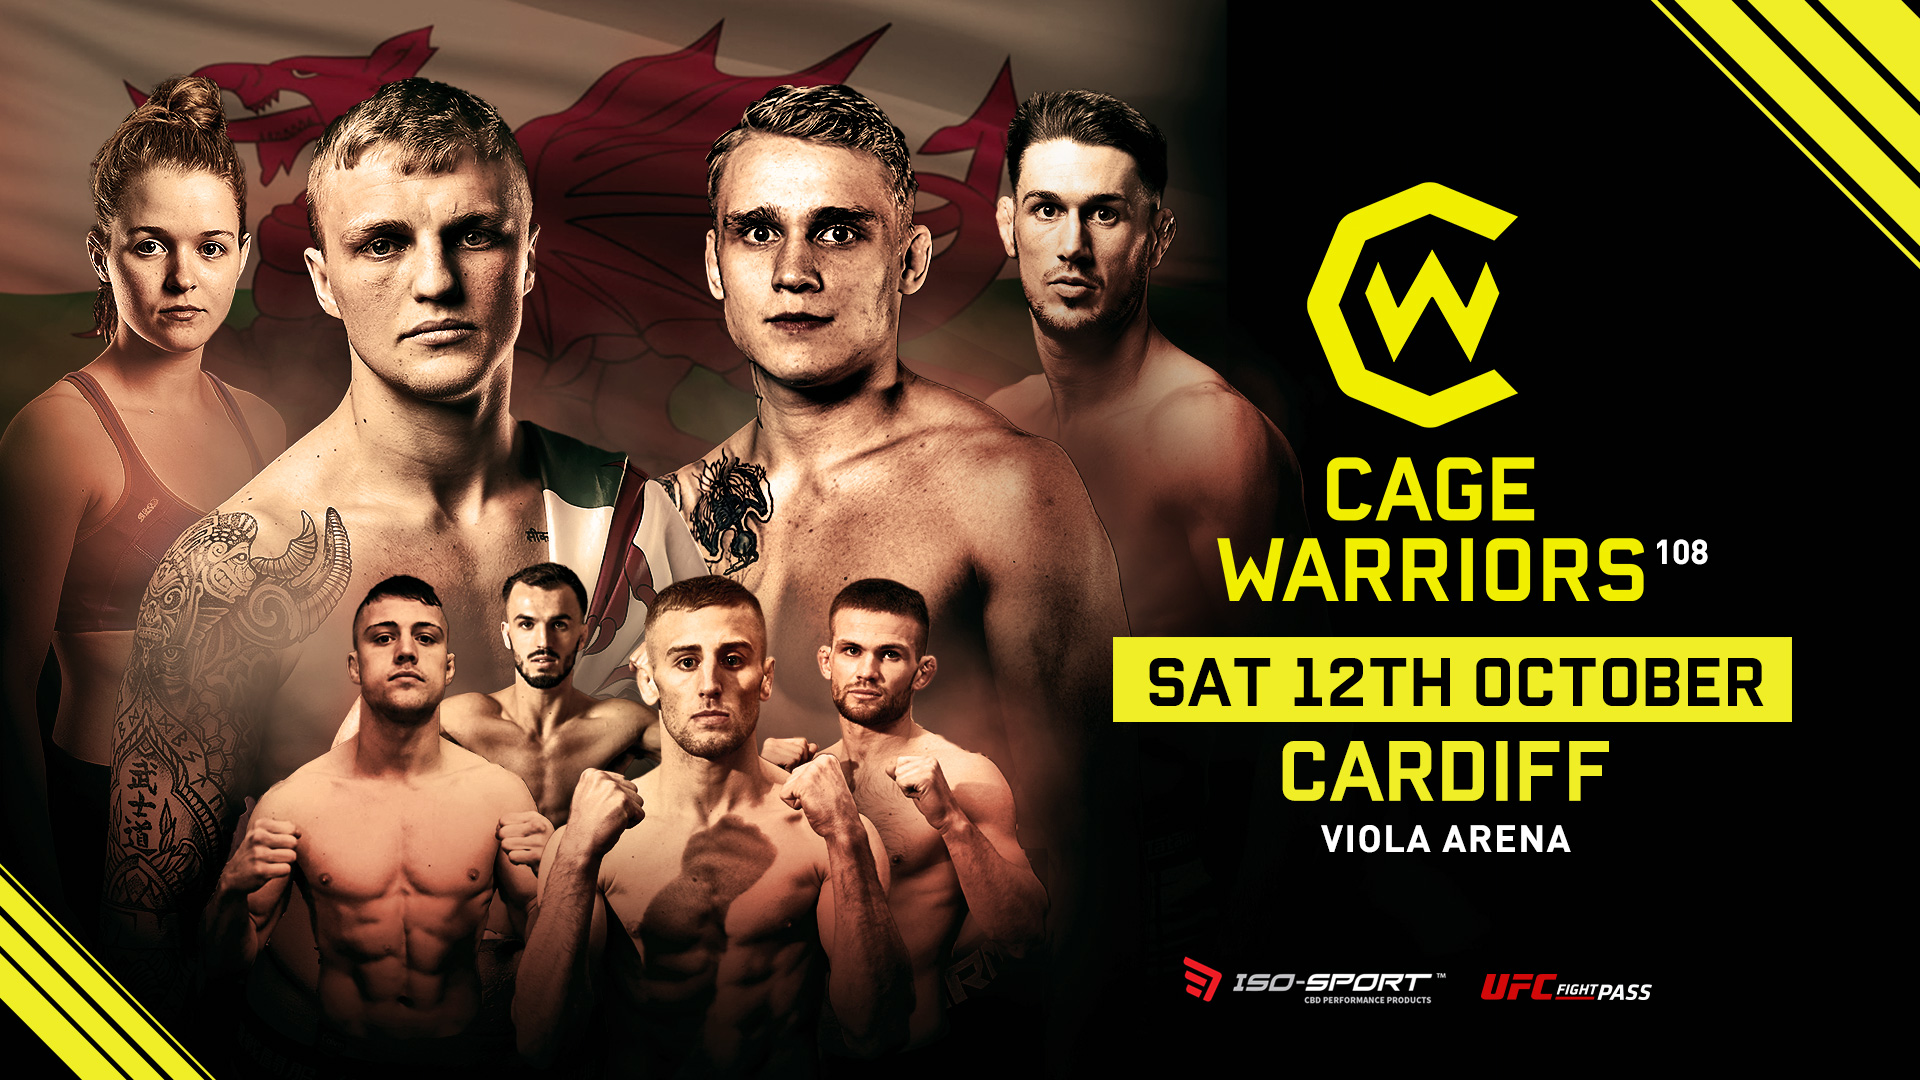  Cage Warriors 108 Full Fight Card And Broadcast Details Announced